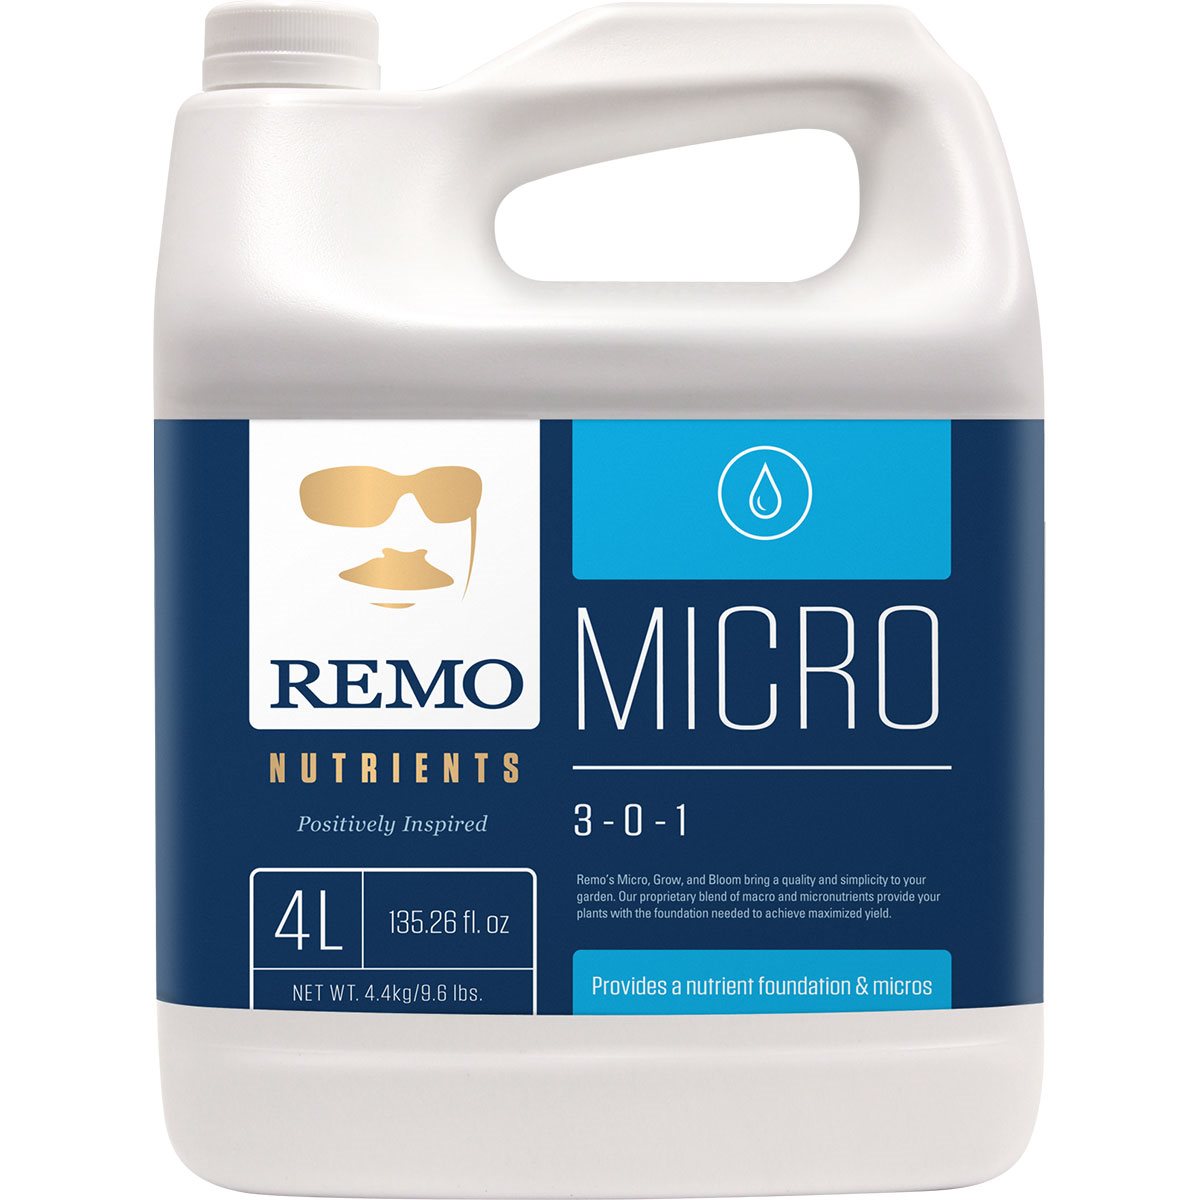 Product Secondary Image:Remo Nutrients Micro (3-0-1)